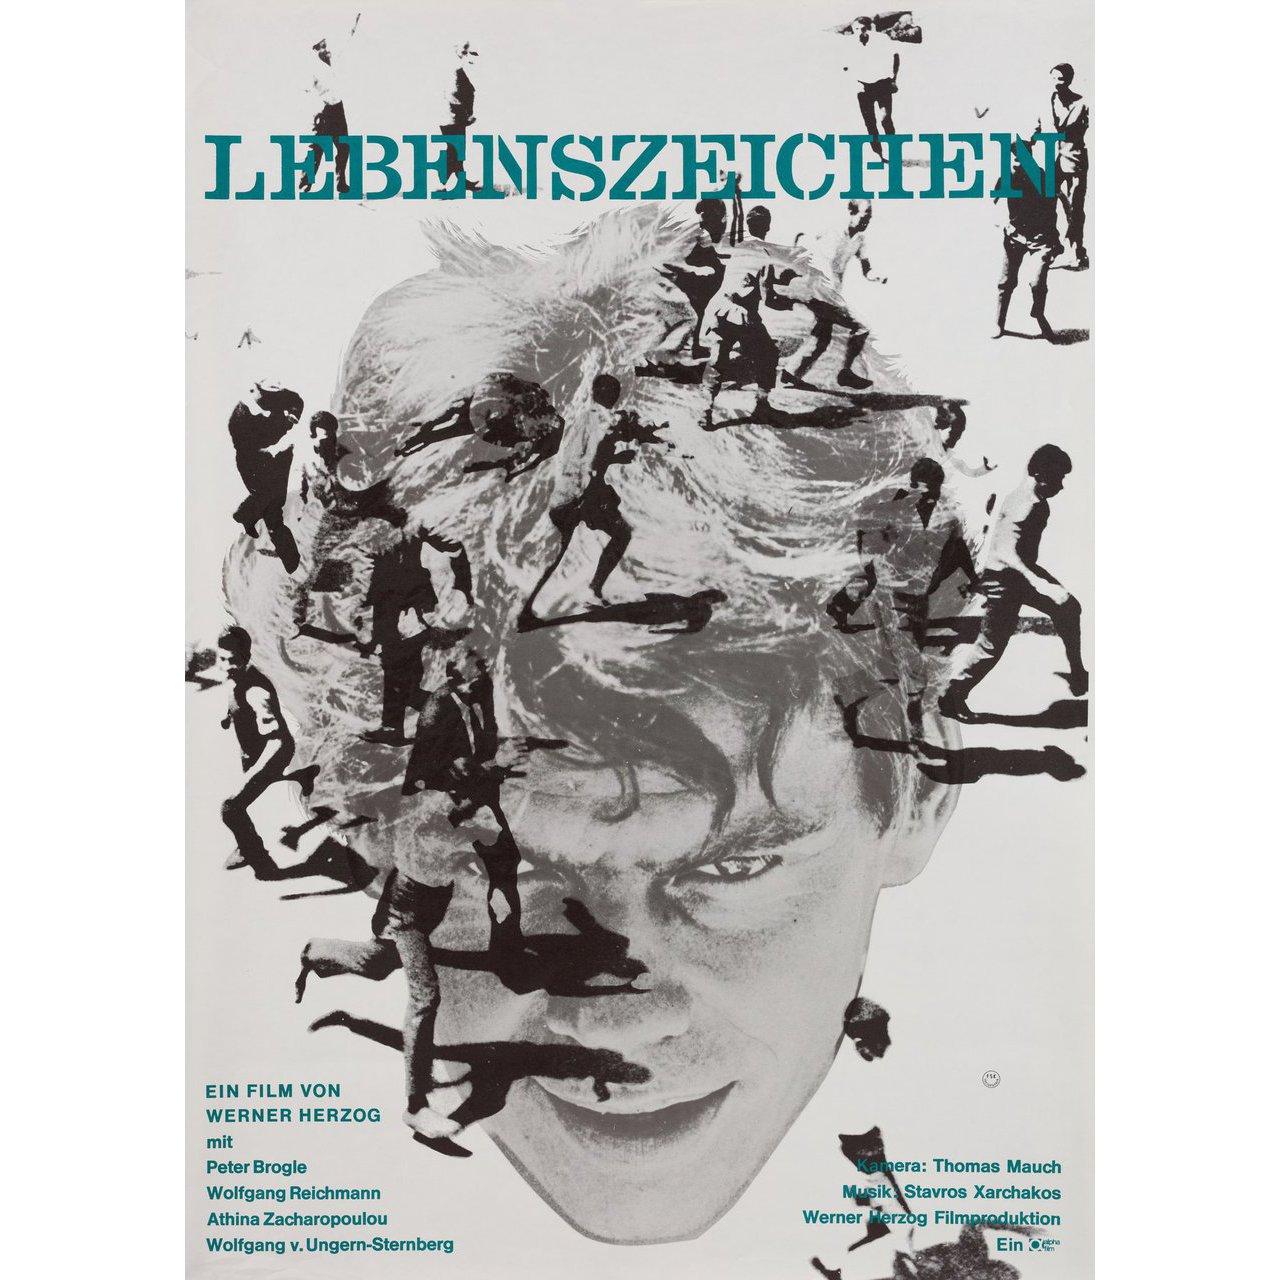 Original 1991 German A1 poster for the 1968 film Signs of Life (Lebenszeichen) directed by Werner Herzog with Peter Brogle / Wolfgang Reichmann / Athina Zacharopoulou. Very Good-Fine condition, rolled. Please note: the size is stated in inches and